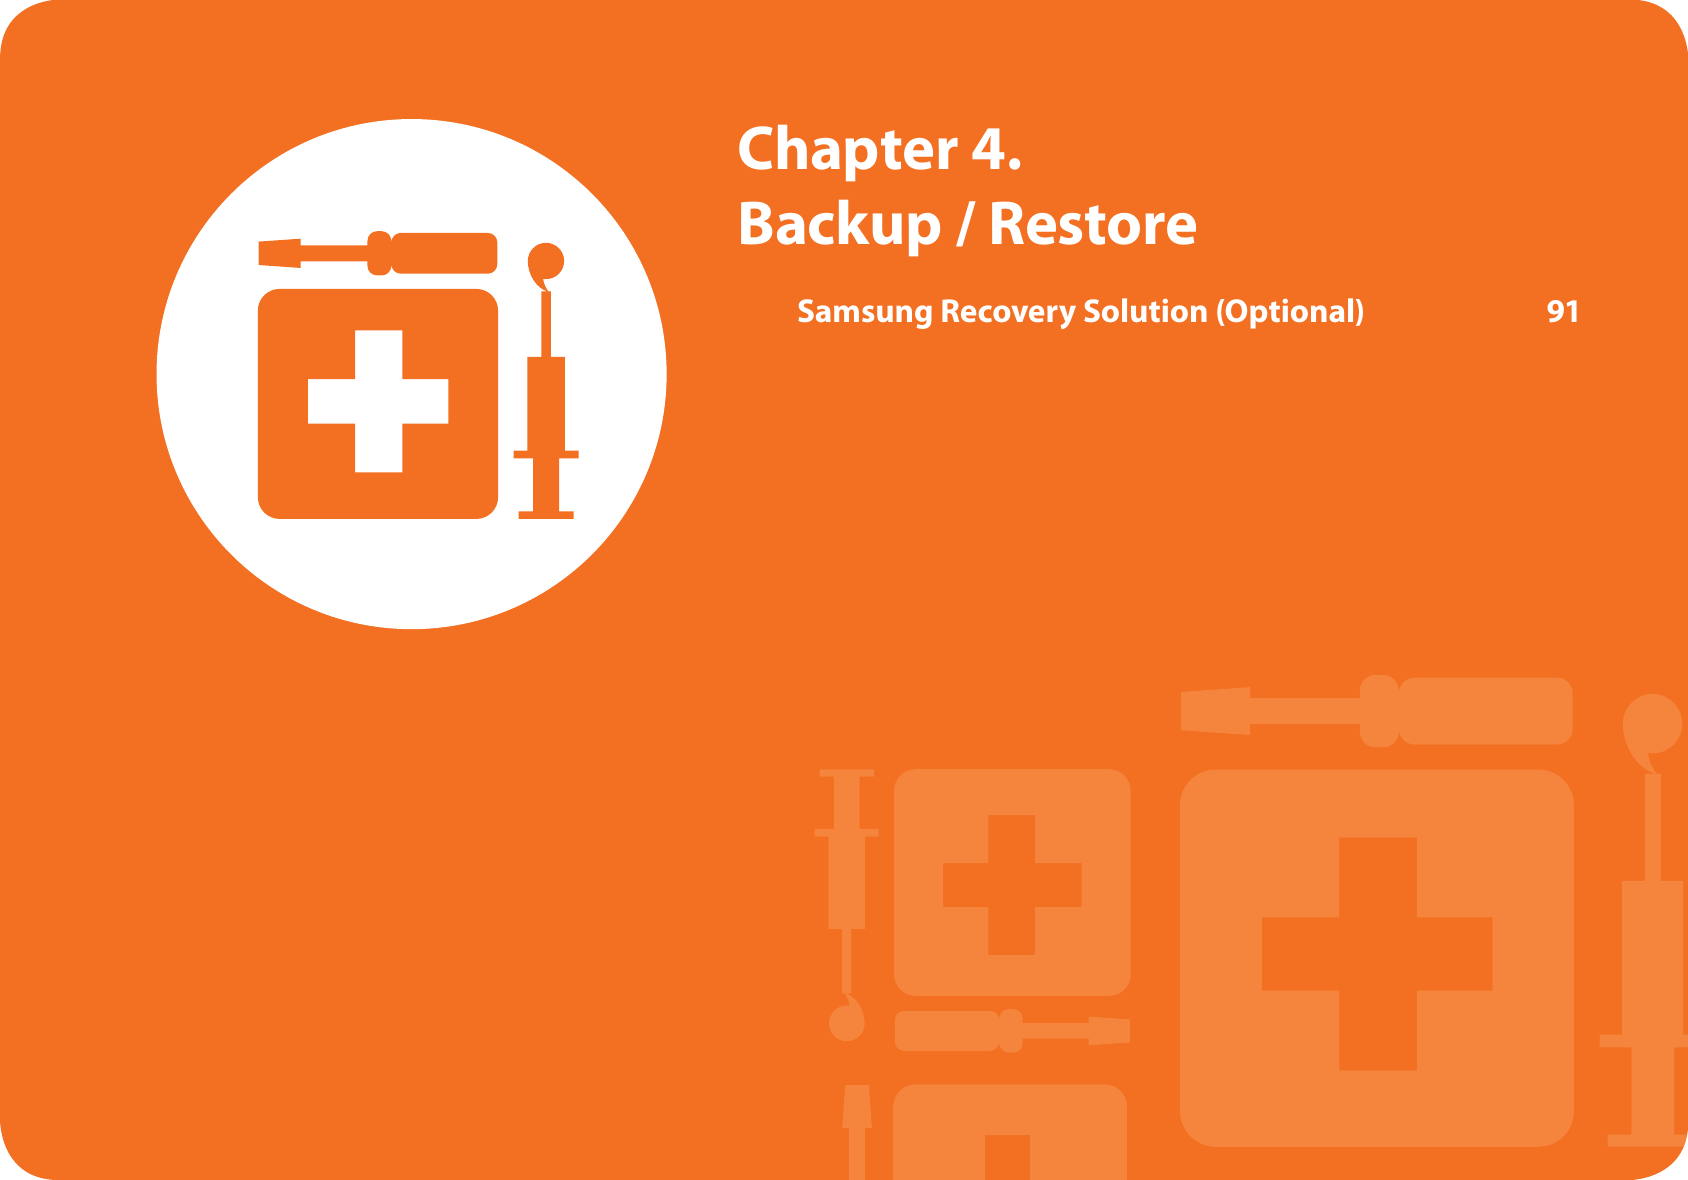  Chapter  4. Backup / RestoreSamsung Recovery Solution (Optional)  91